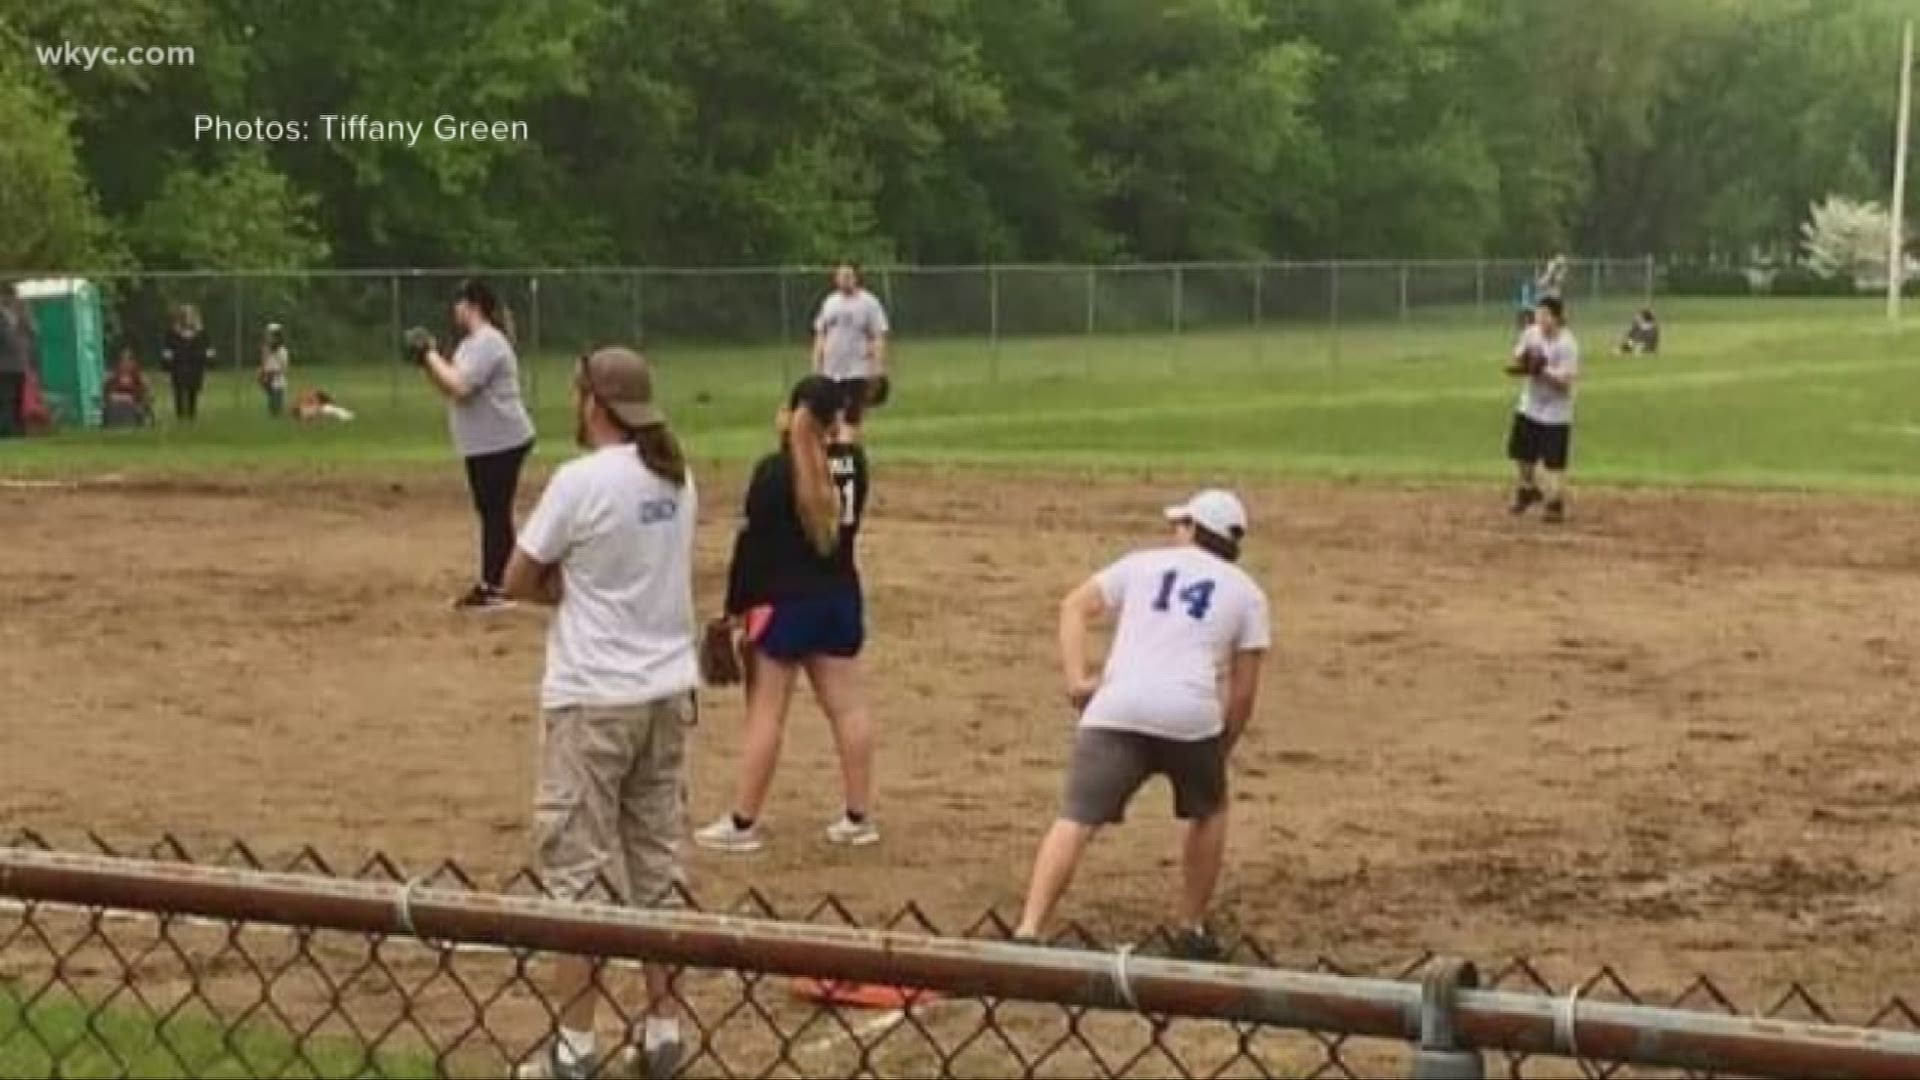 Local woman says she was pulled from softball program after missing too much church